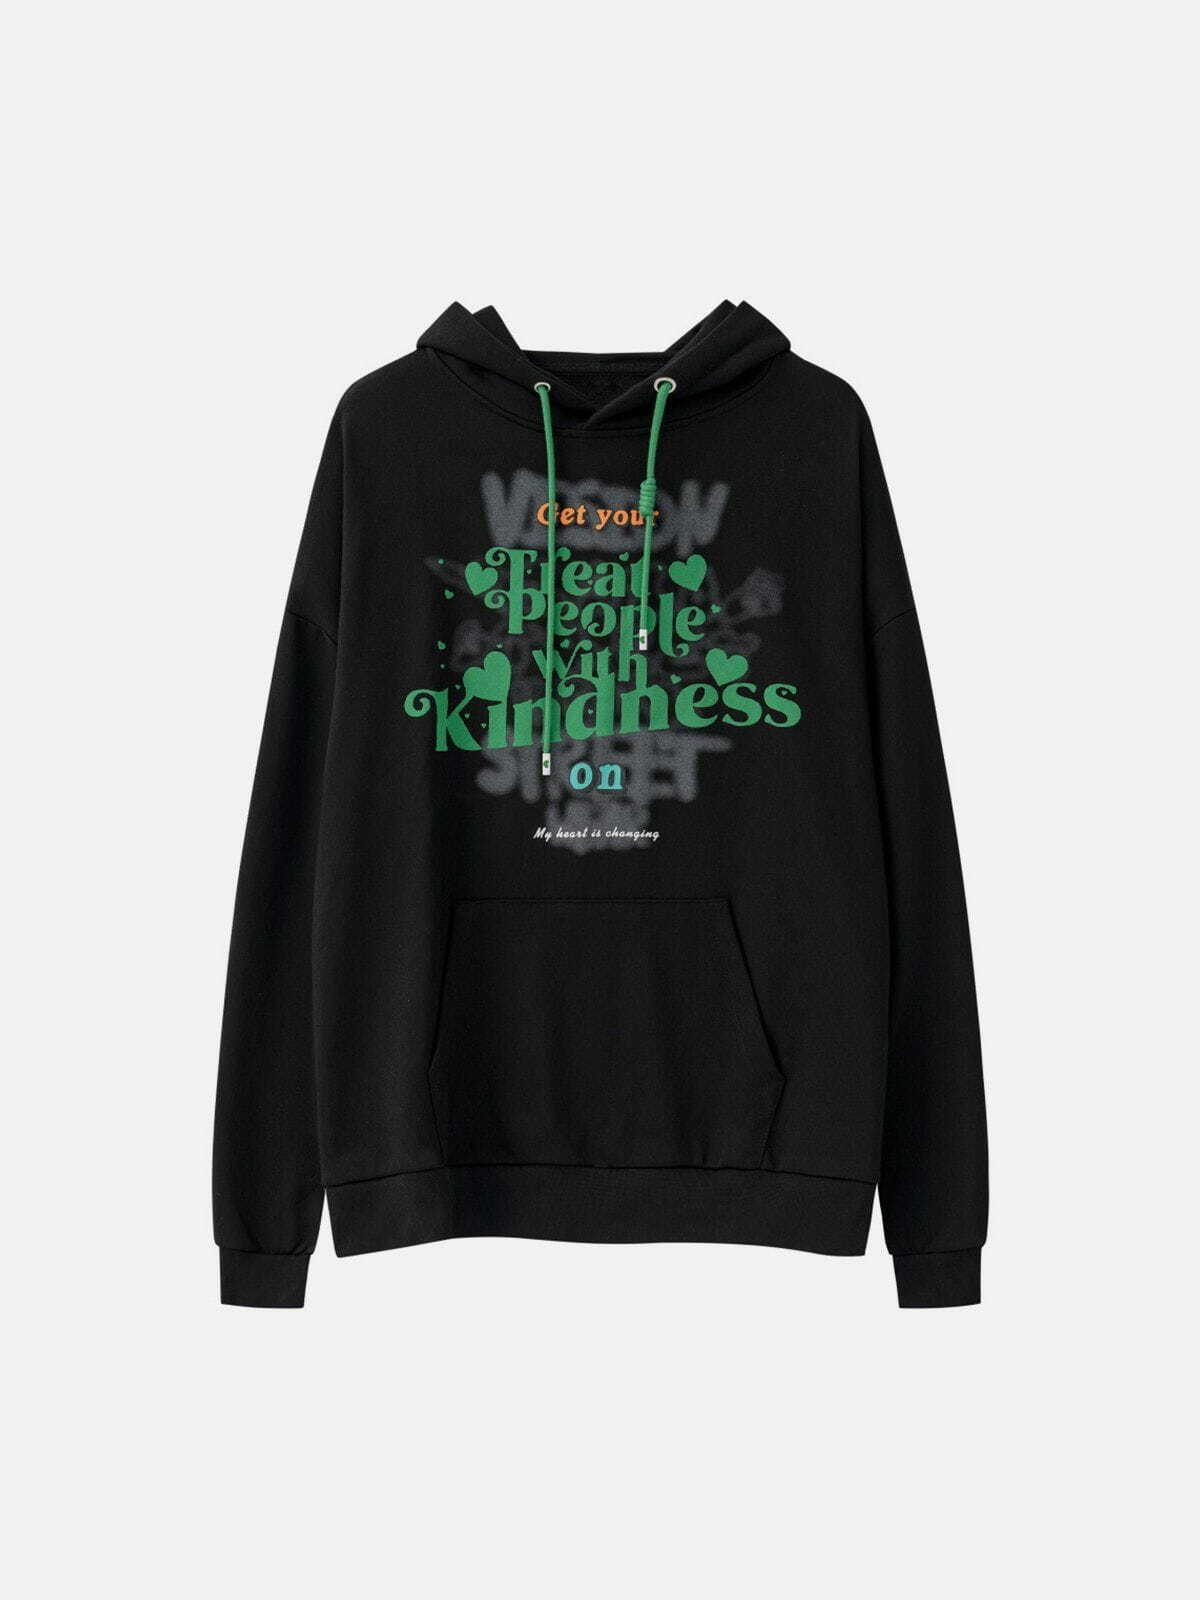 smudge print hoodie edgy letter design 4239